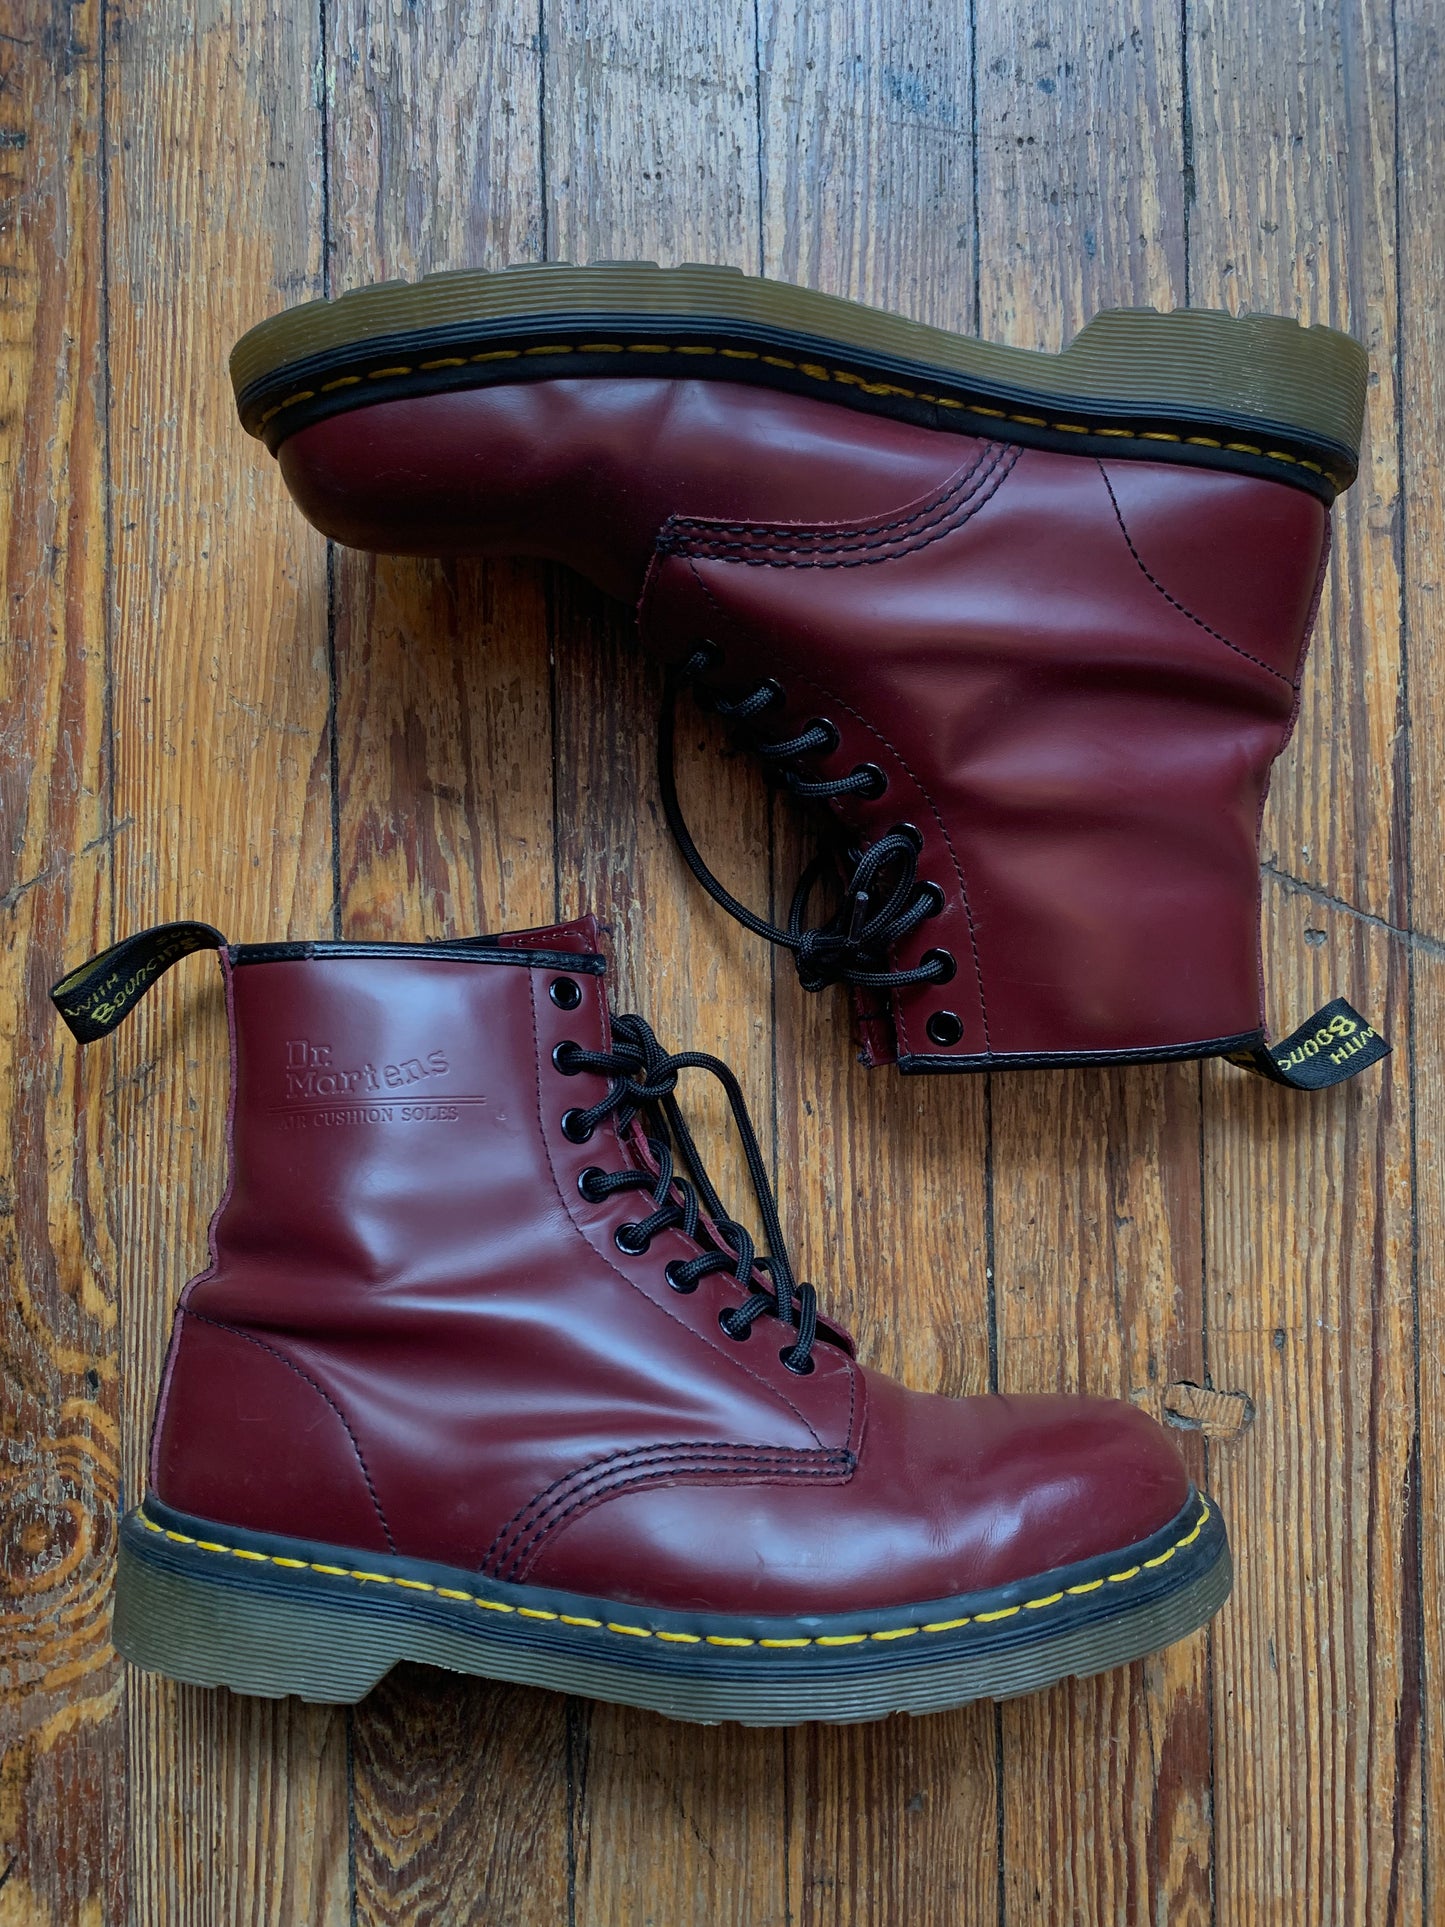 Classic Dr. Marten’s 1460 Smooth Leather Cherry Red Lace Up Boots